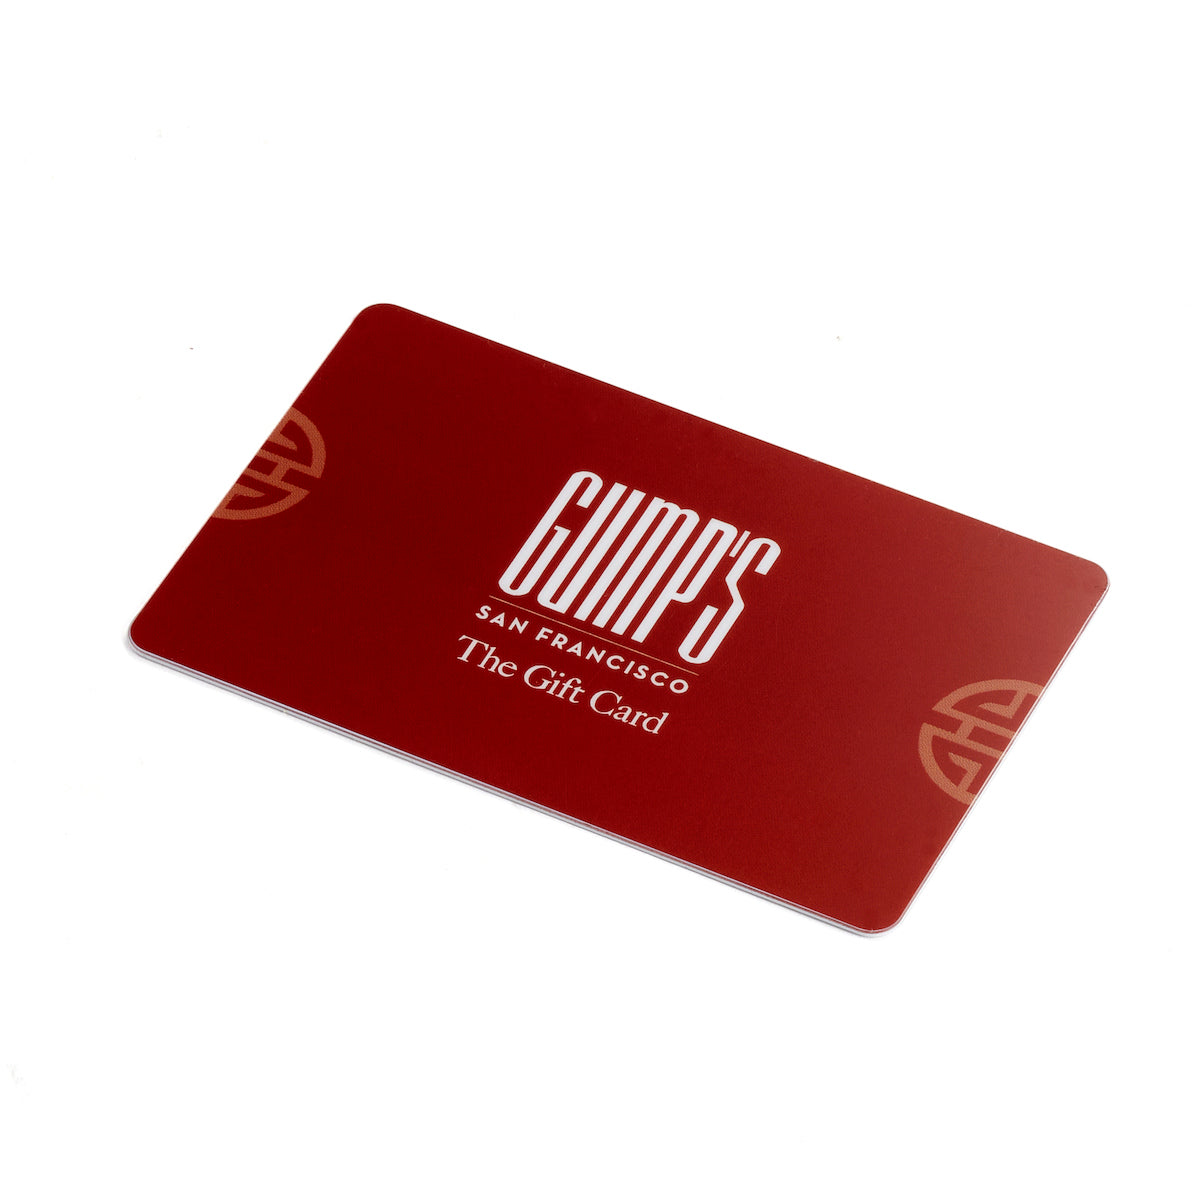 The Gump's Gift Card $150